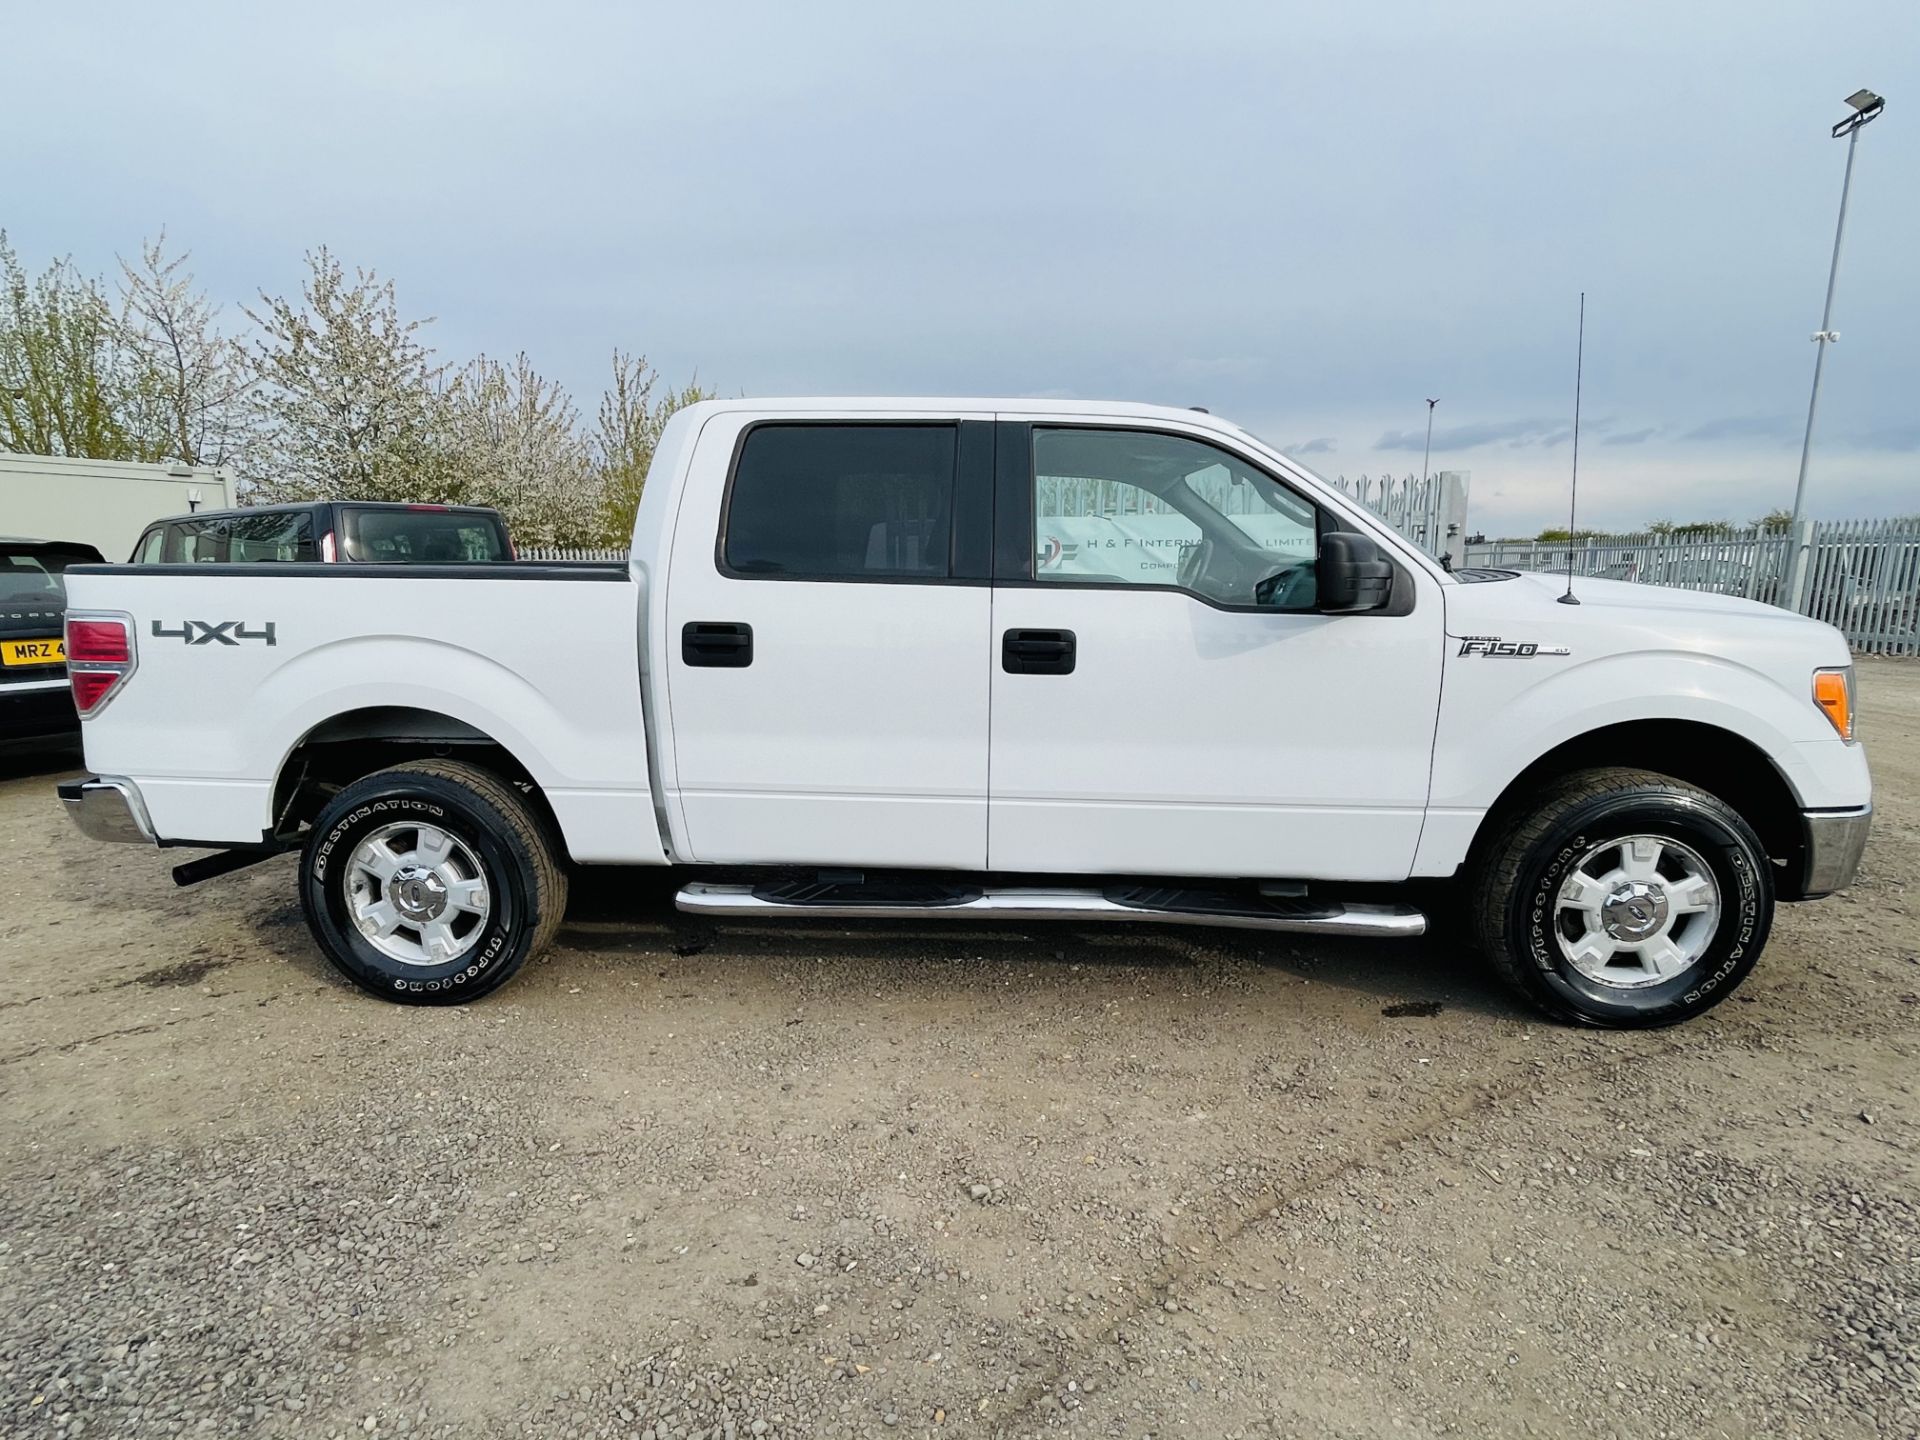 Ford F-150 XLT 4.6L V8 Super-crew 4WD 2010 ' 2010 Year' 6 Seats - Air con - NO RESERVE - Image 17 of 24